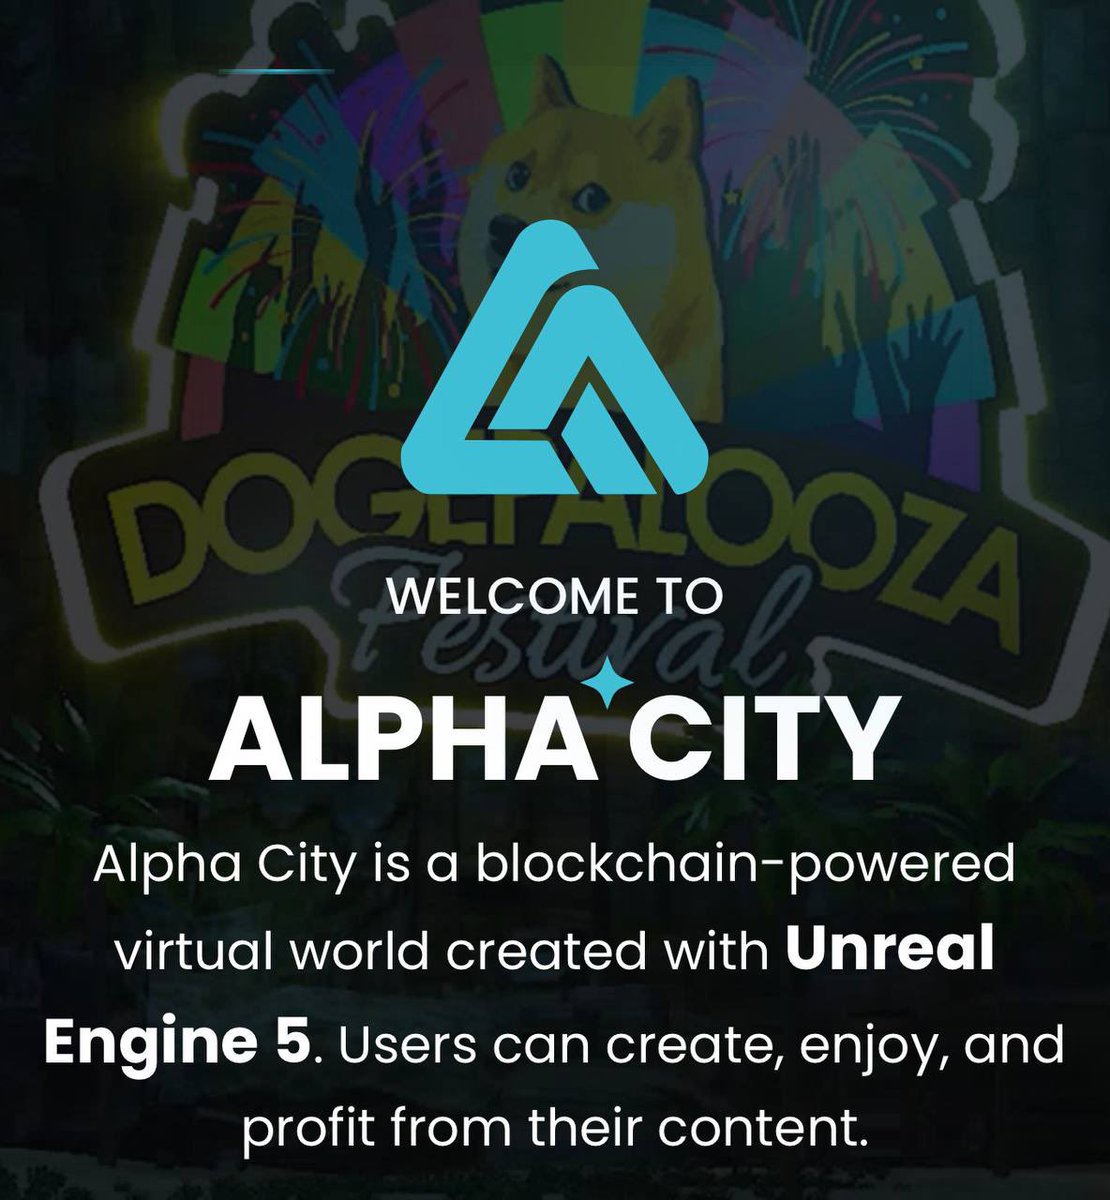 $ALPHA's #AlphaCityAI is gearing up to launch Version 2 of their upgraded contract in just a few days. This update will bring exciting features such as #Staking, a AAA FPS Game for play-to-earn, and NFT Land that supports creation and customization. The metaverse, built on